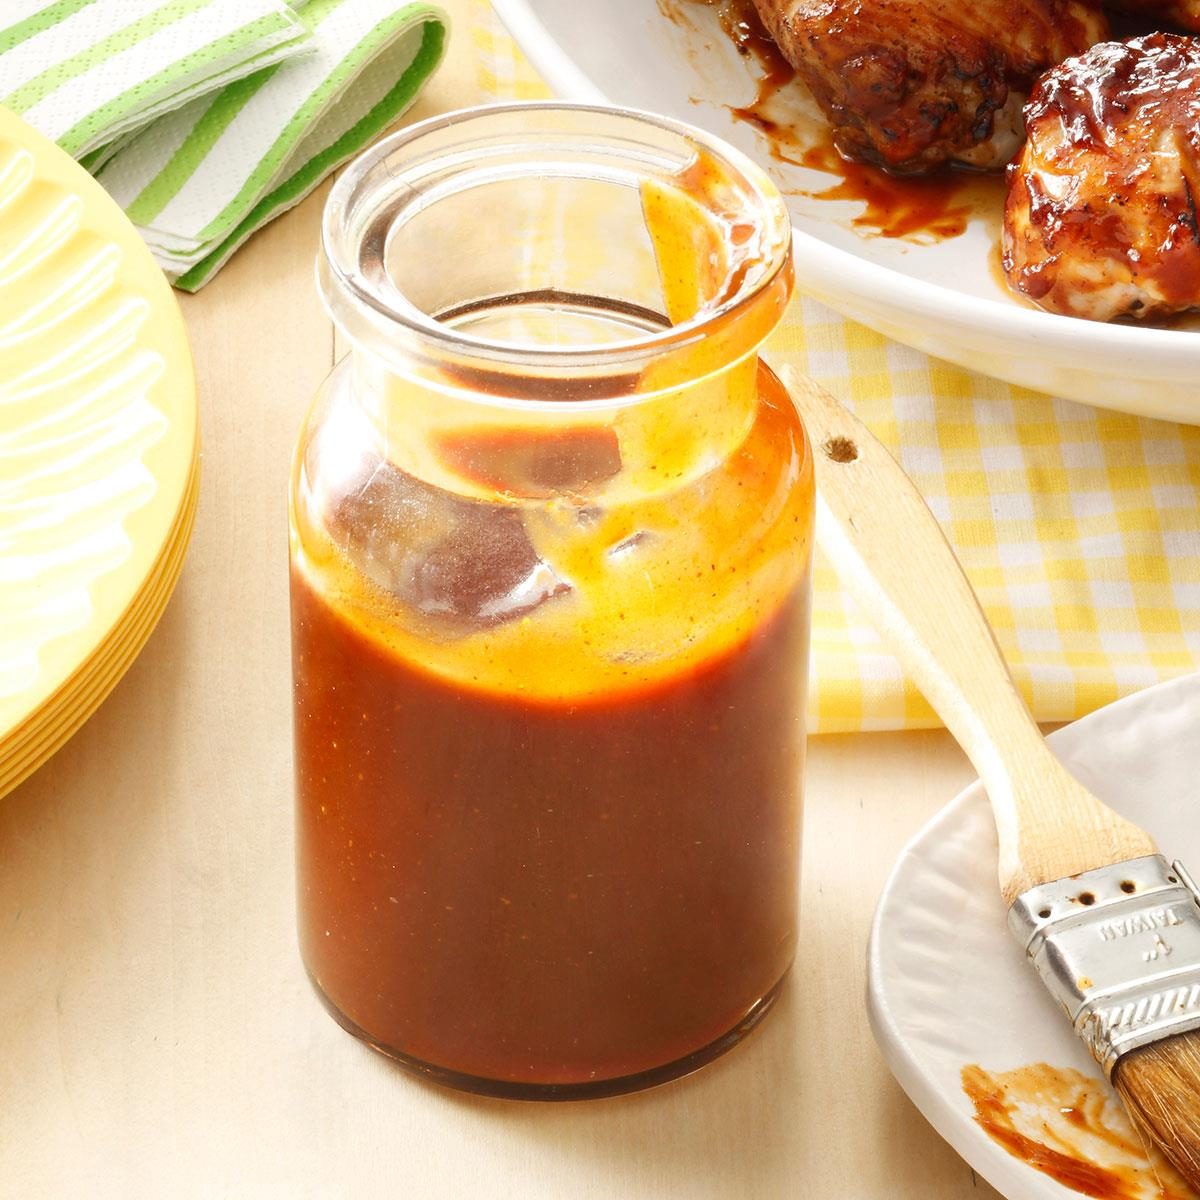 https://www.tasteofhome.com/wp-content/uploads/2018/01/Sweet-Spicy-Barbecue-Sauce_exps82530_CP143300C01_17_4bC_RMS-1.jpg